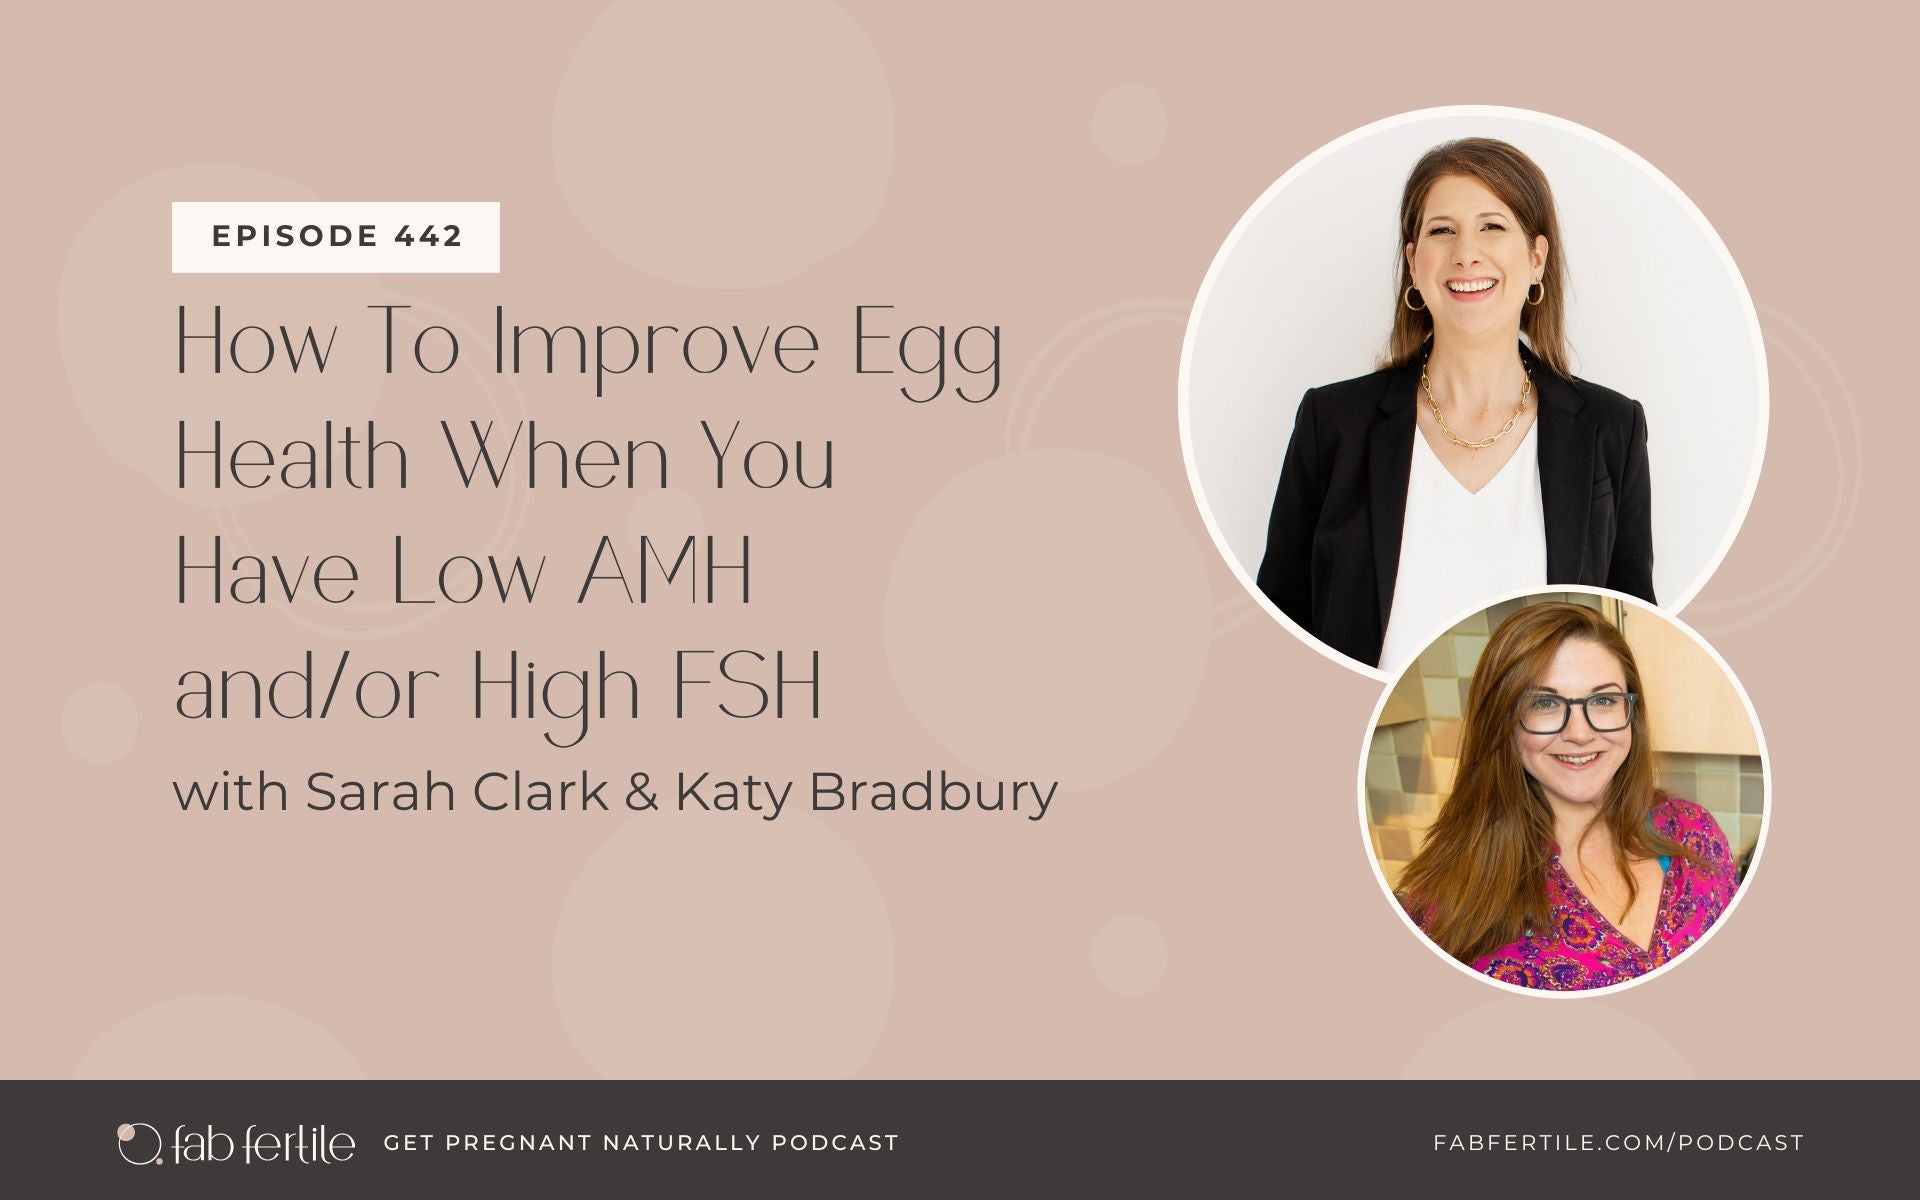 How To Improve Egg Health When You Have Low AMH and/or High FSH